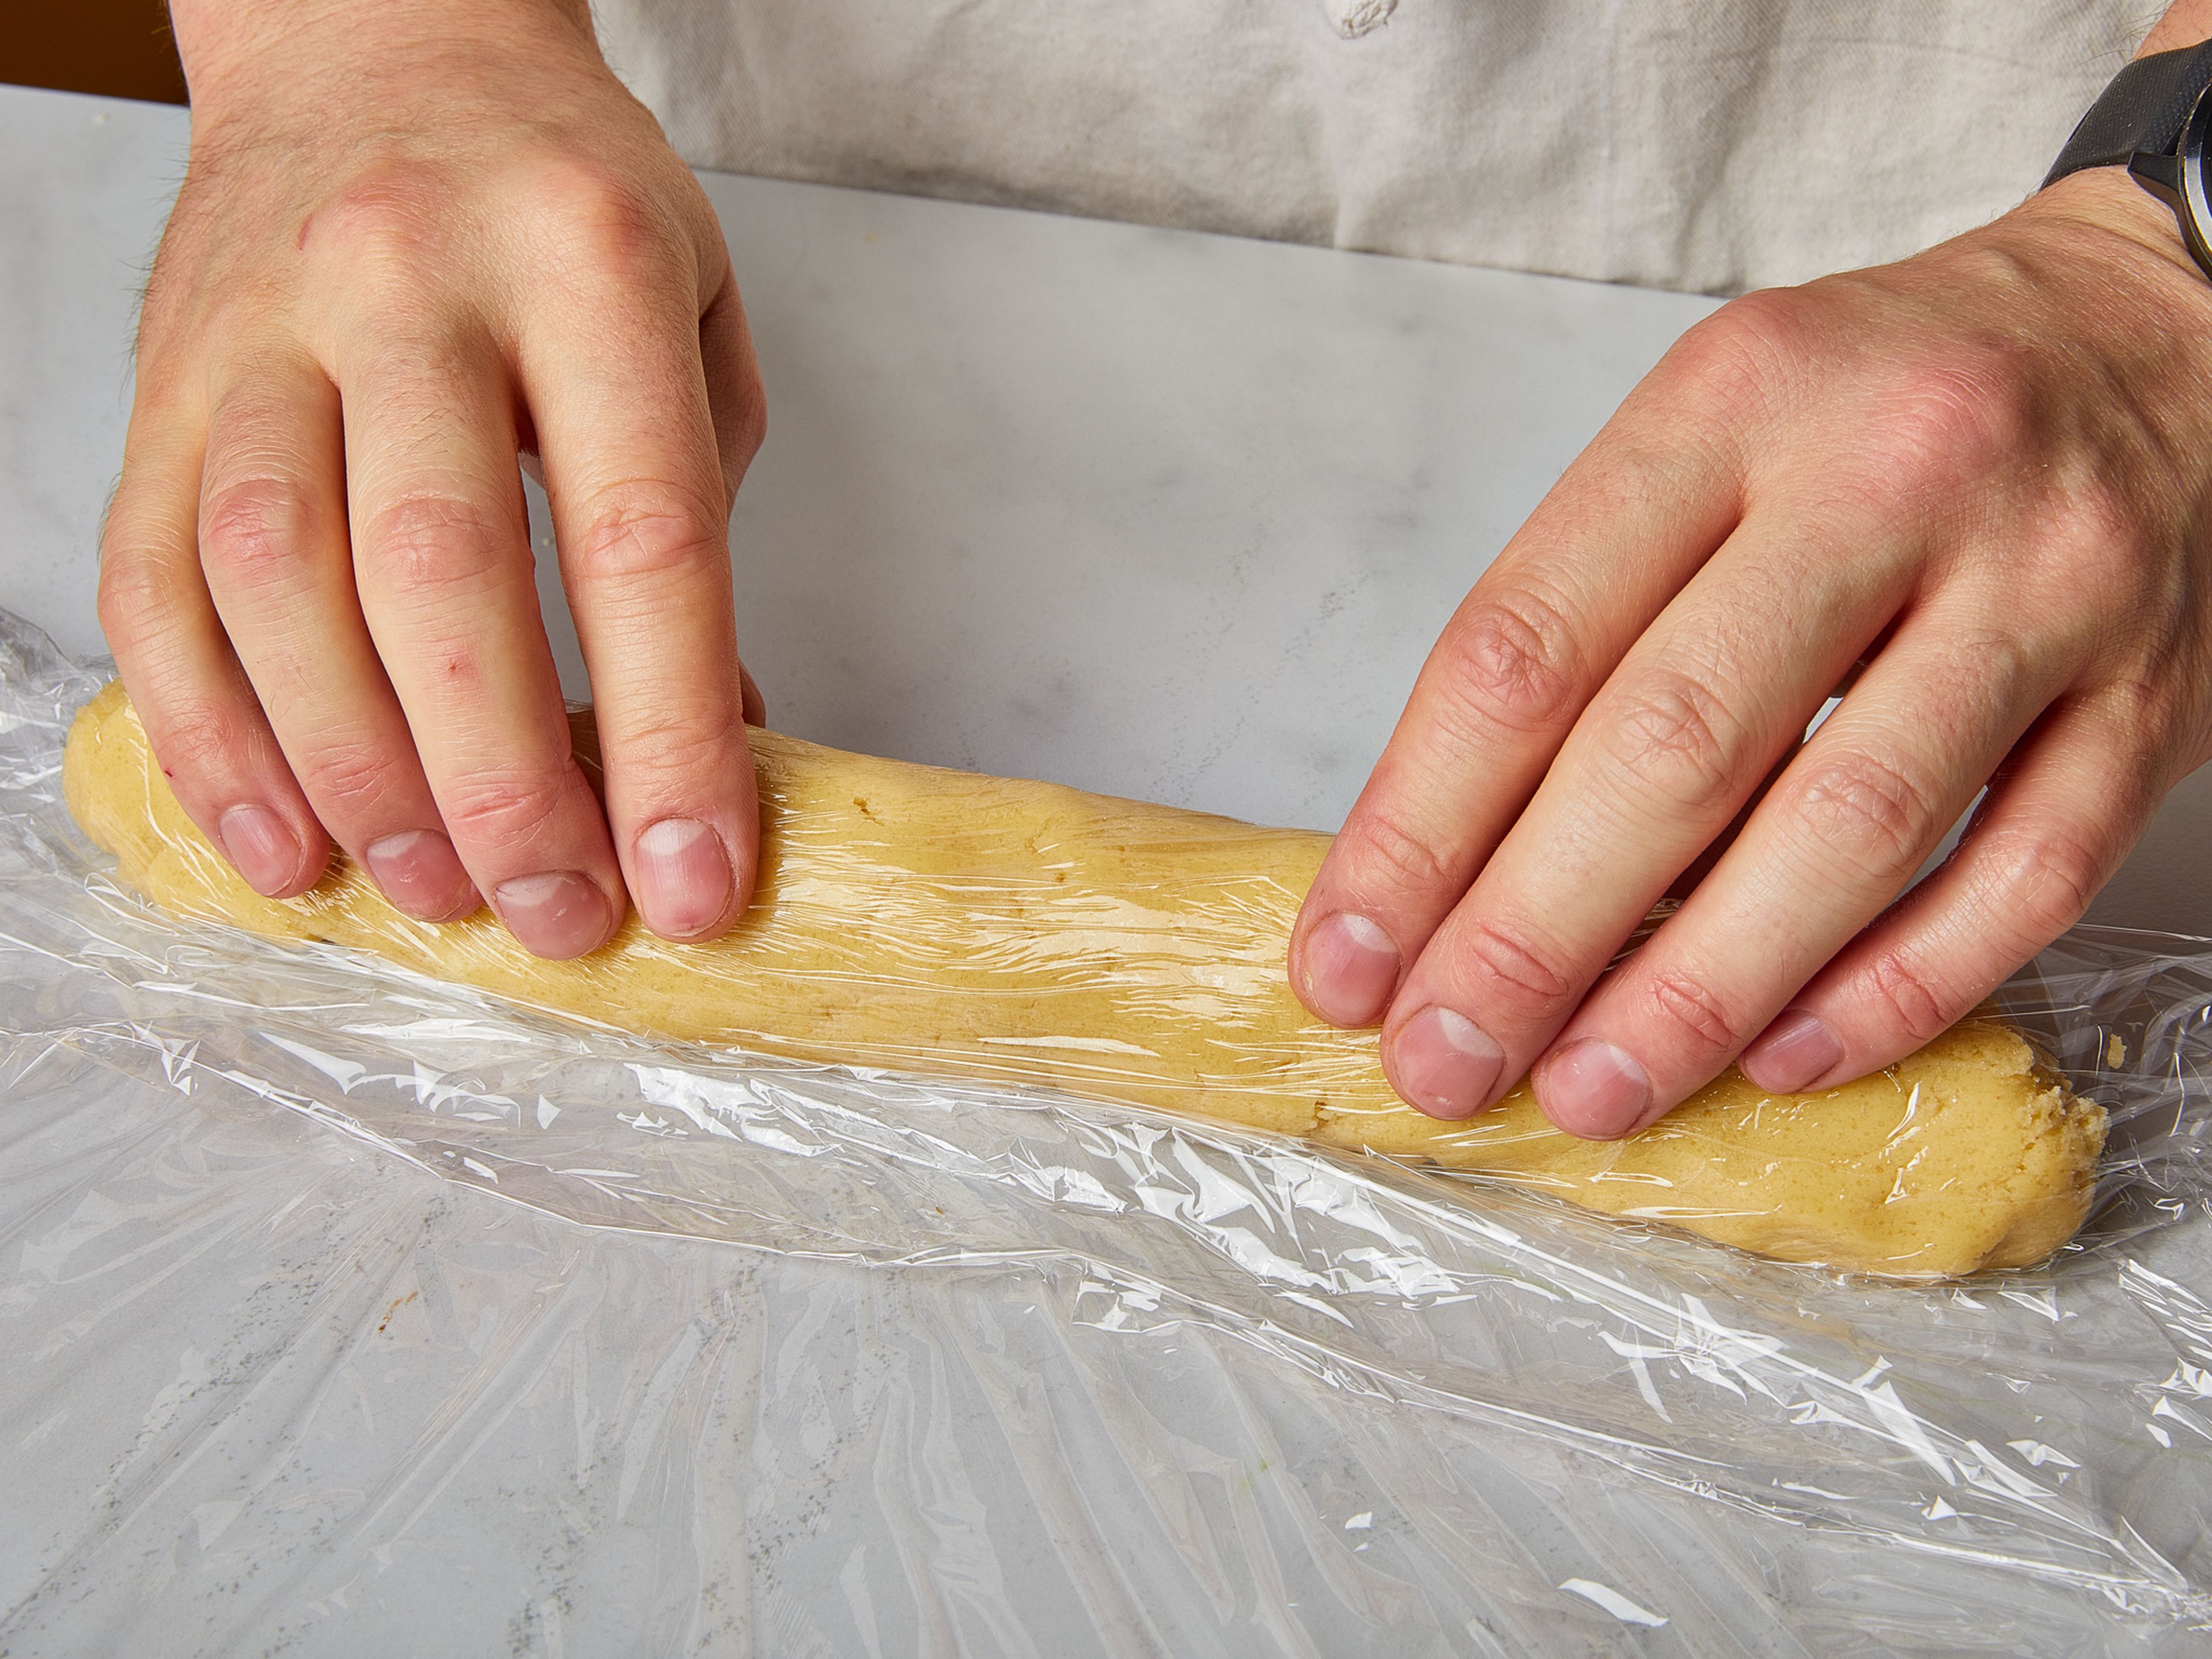 Divide the dough in half and place each half on a large piece of plastic wrap. Fold the wrap over the dough so your hands don't get sticky. Shape each half into a roll of approx. 3 cm/1 in. in diameter. Wrap tightly and place in the freezer until set, approx. 2 hrs., or overnight. If you want to bake the cookies another time, keep the dough for a week in the fridge or a month in the freezer.